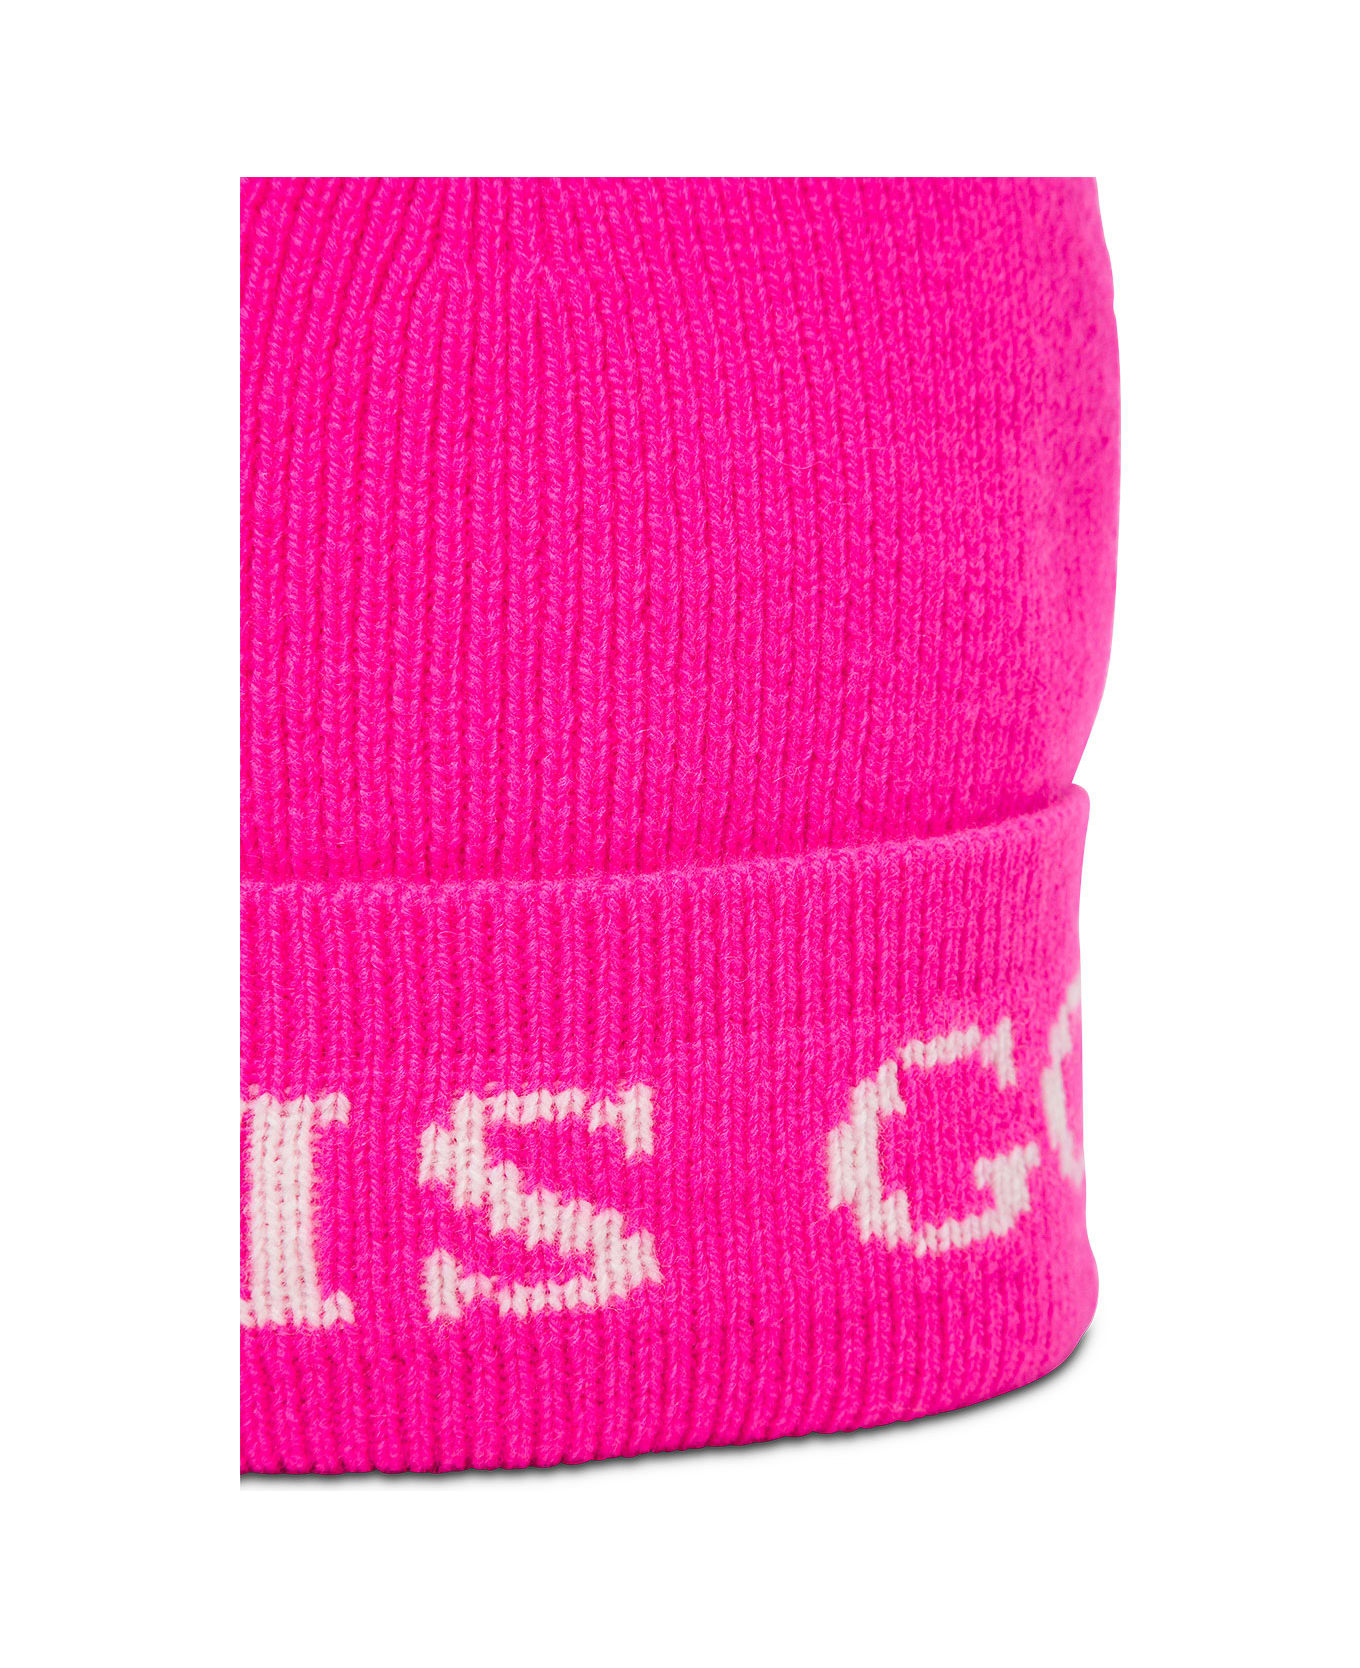 IRENEISGOOD Pink Wool And Cashmere Hat With Logo - Fucsia